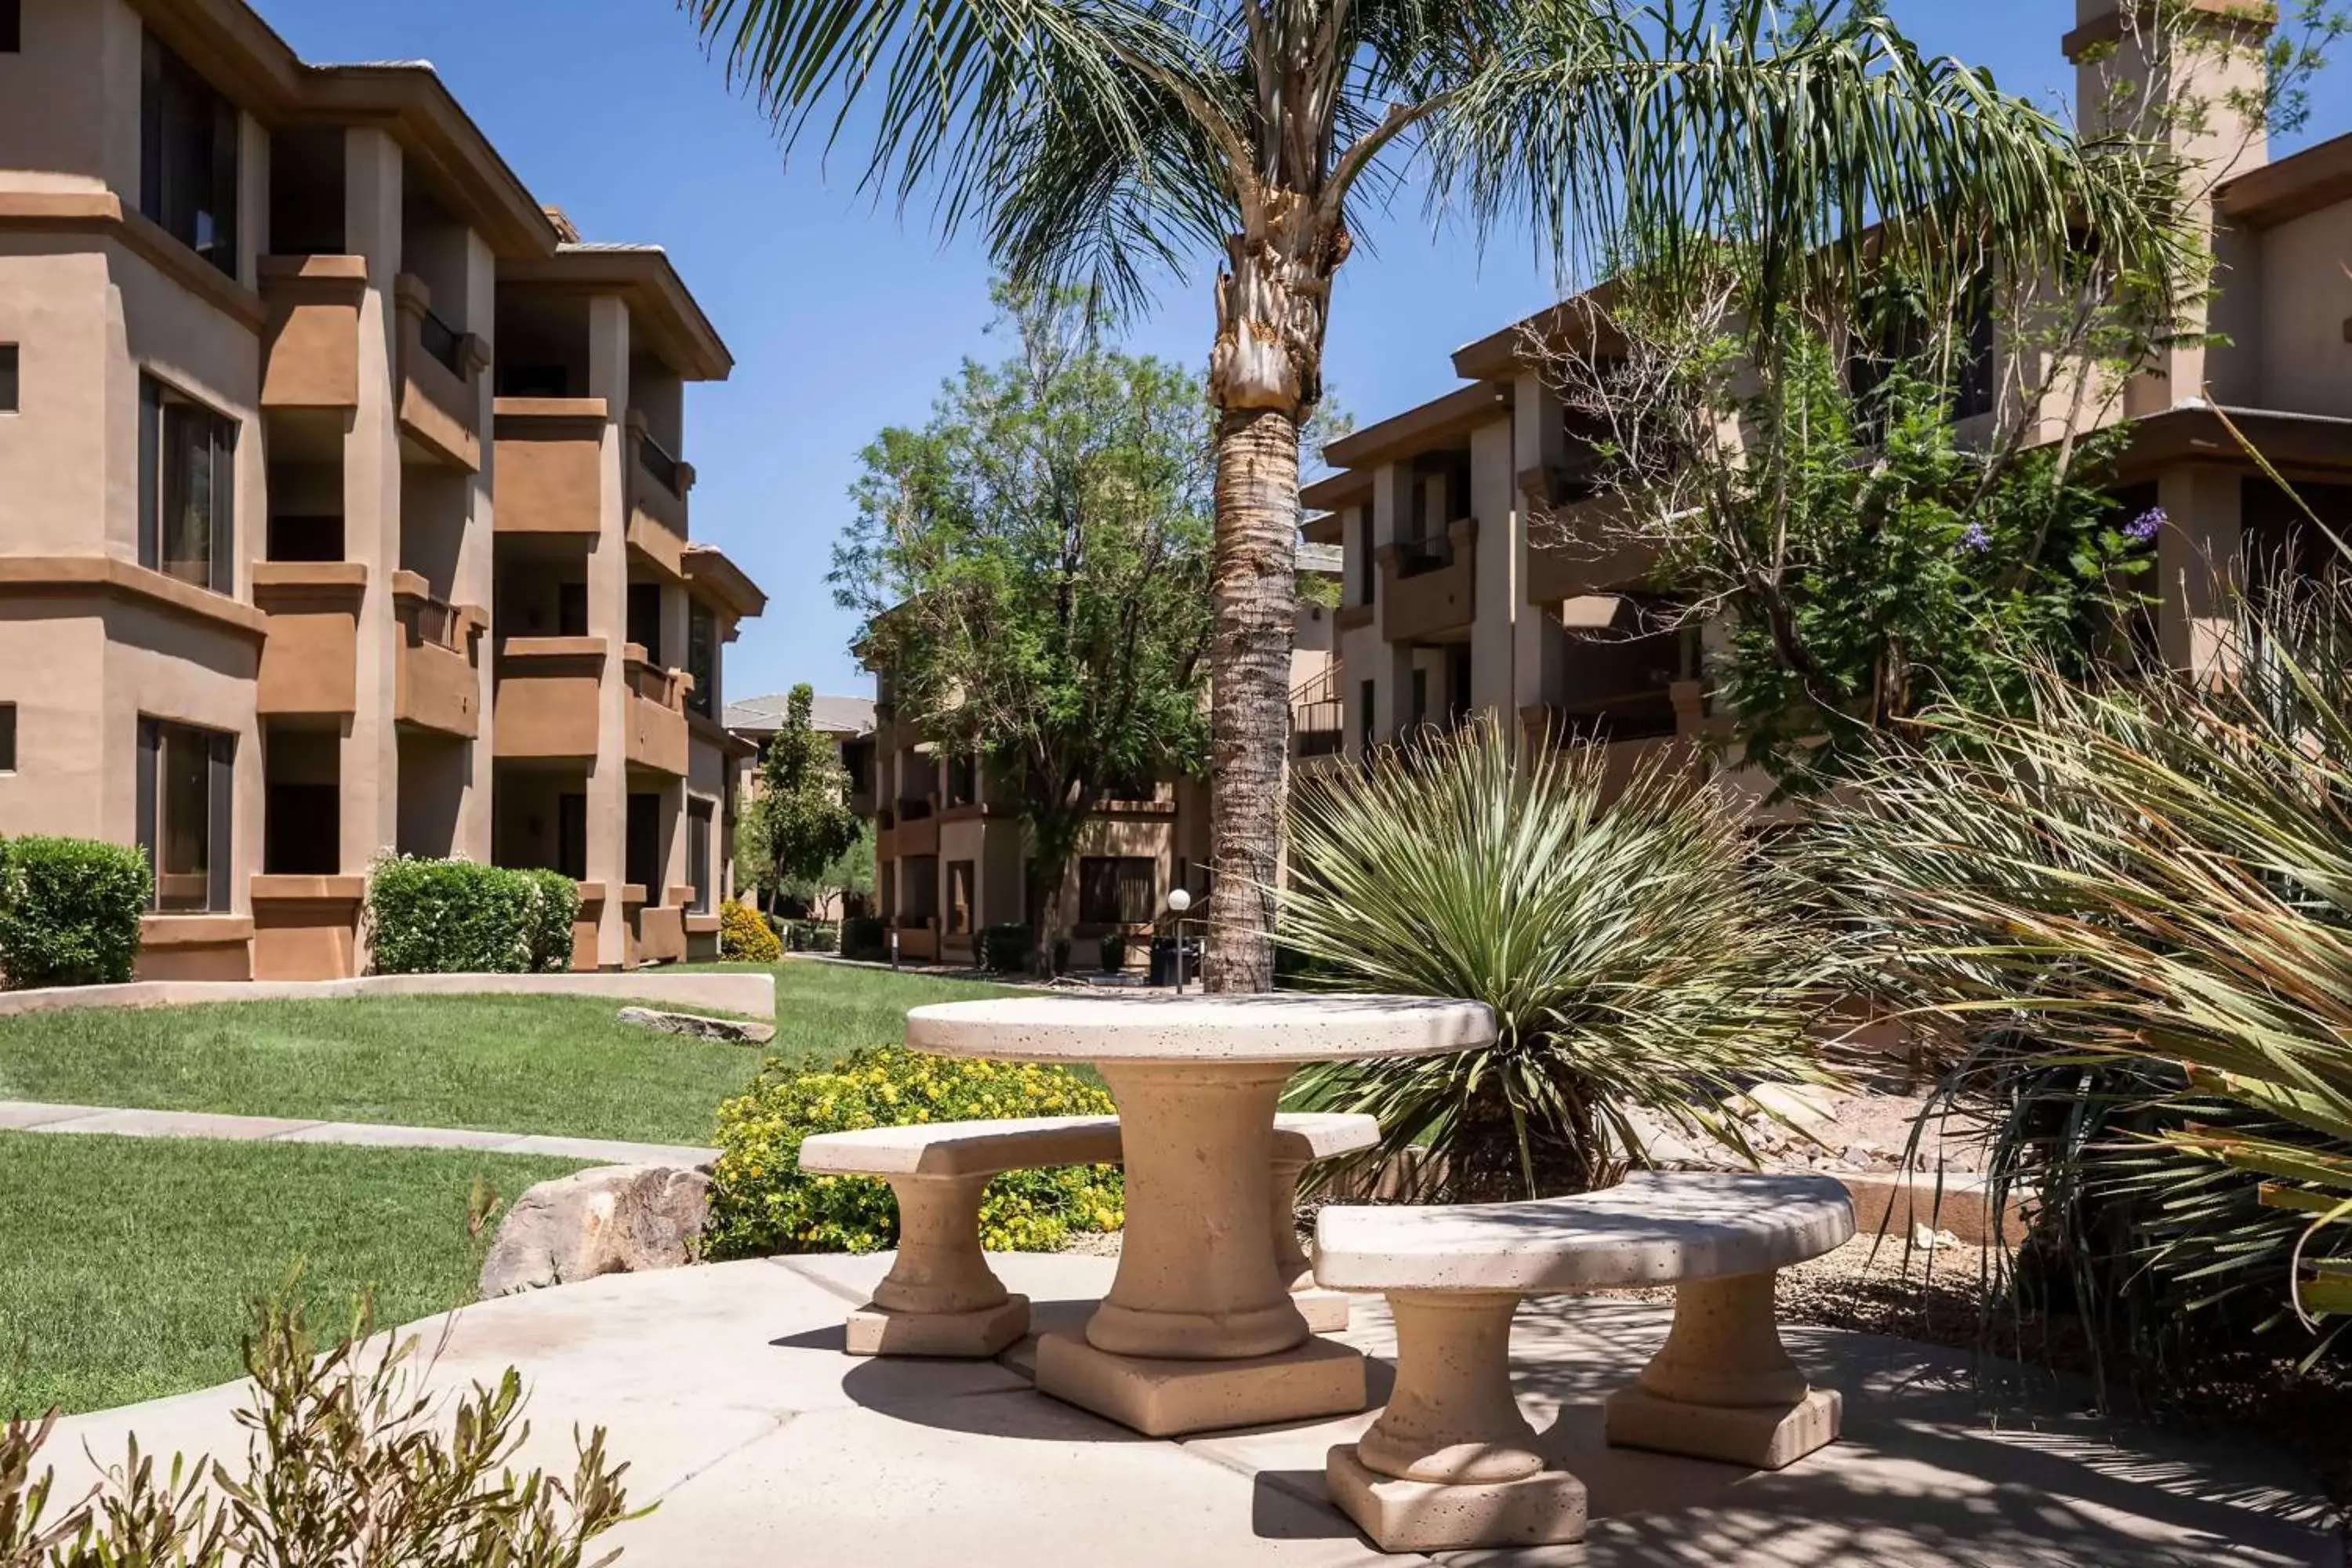 Inner courtyard view, Property Building in Hilton Vacation Club Scottsdale Links Resort